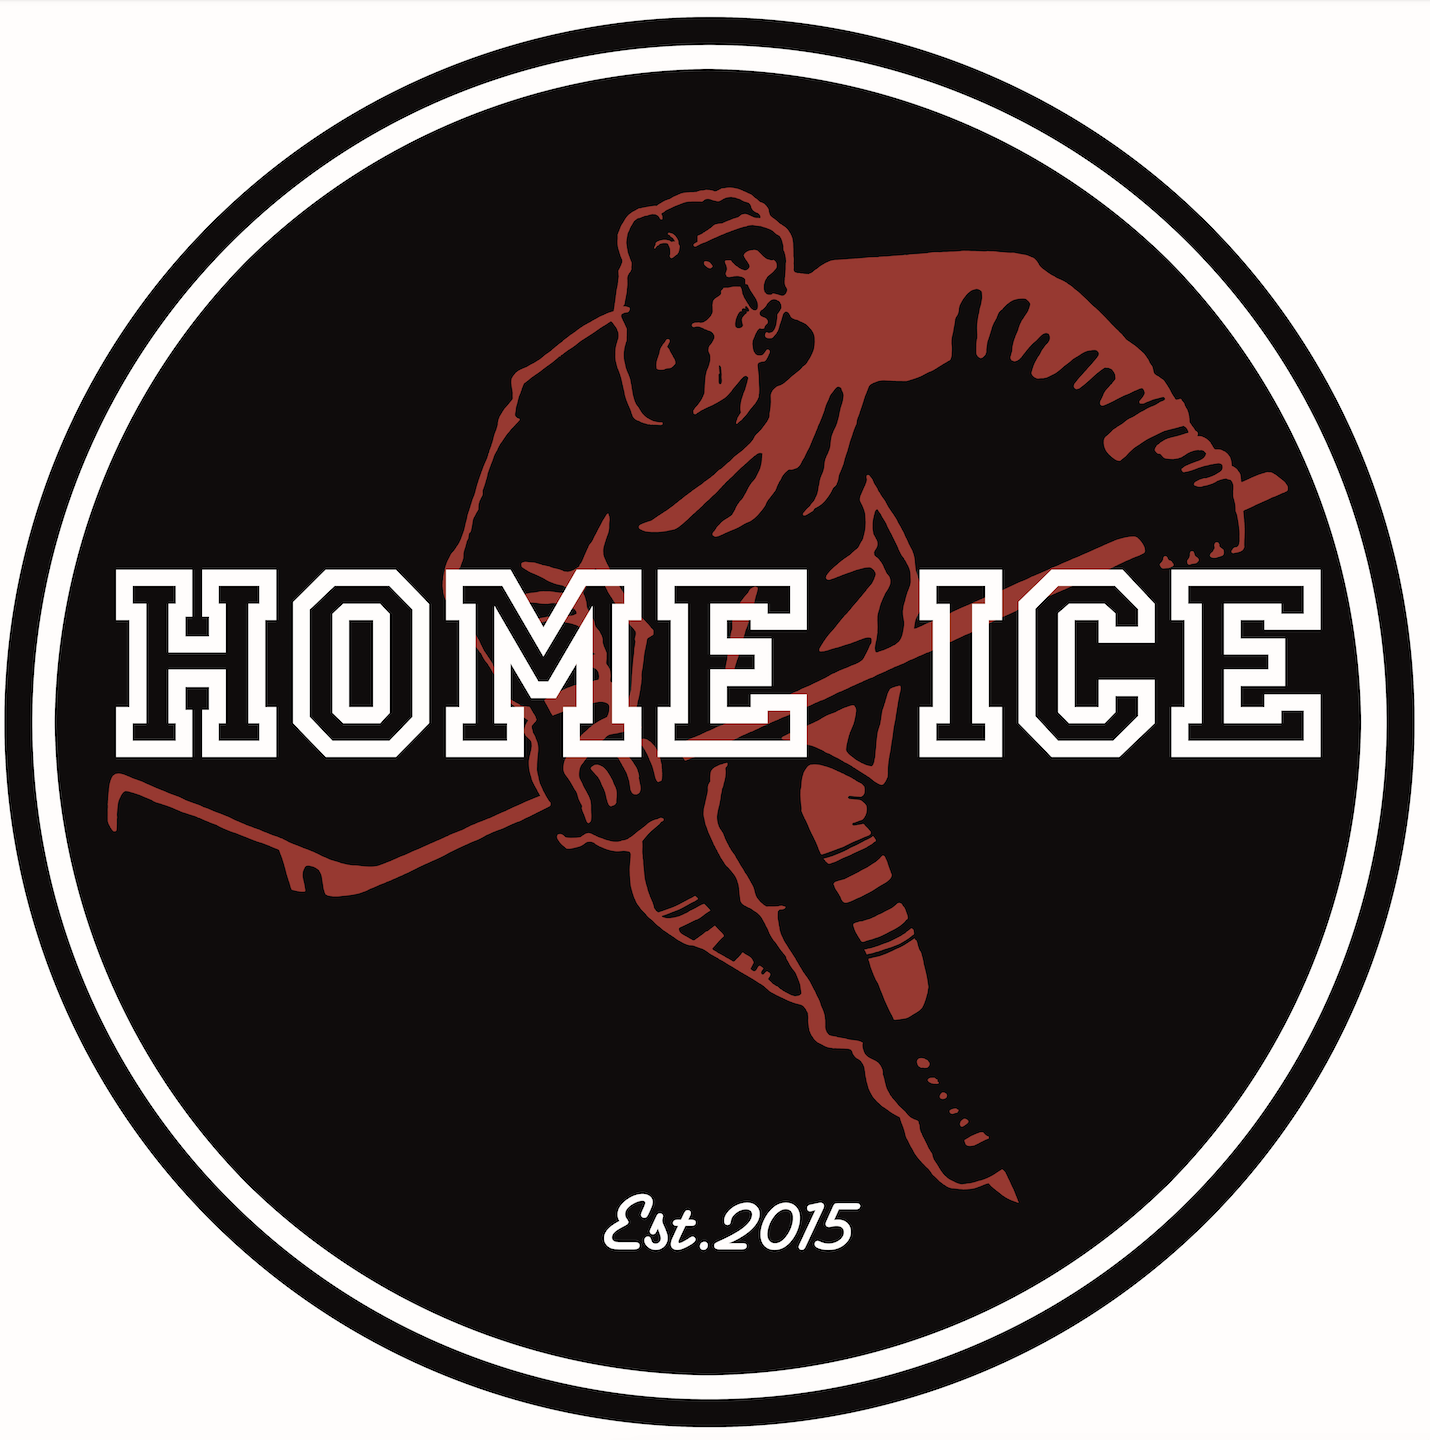 Home Ice to Open Hockey Specific Training Center in Kenilworth, Illinois this Summer